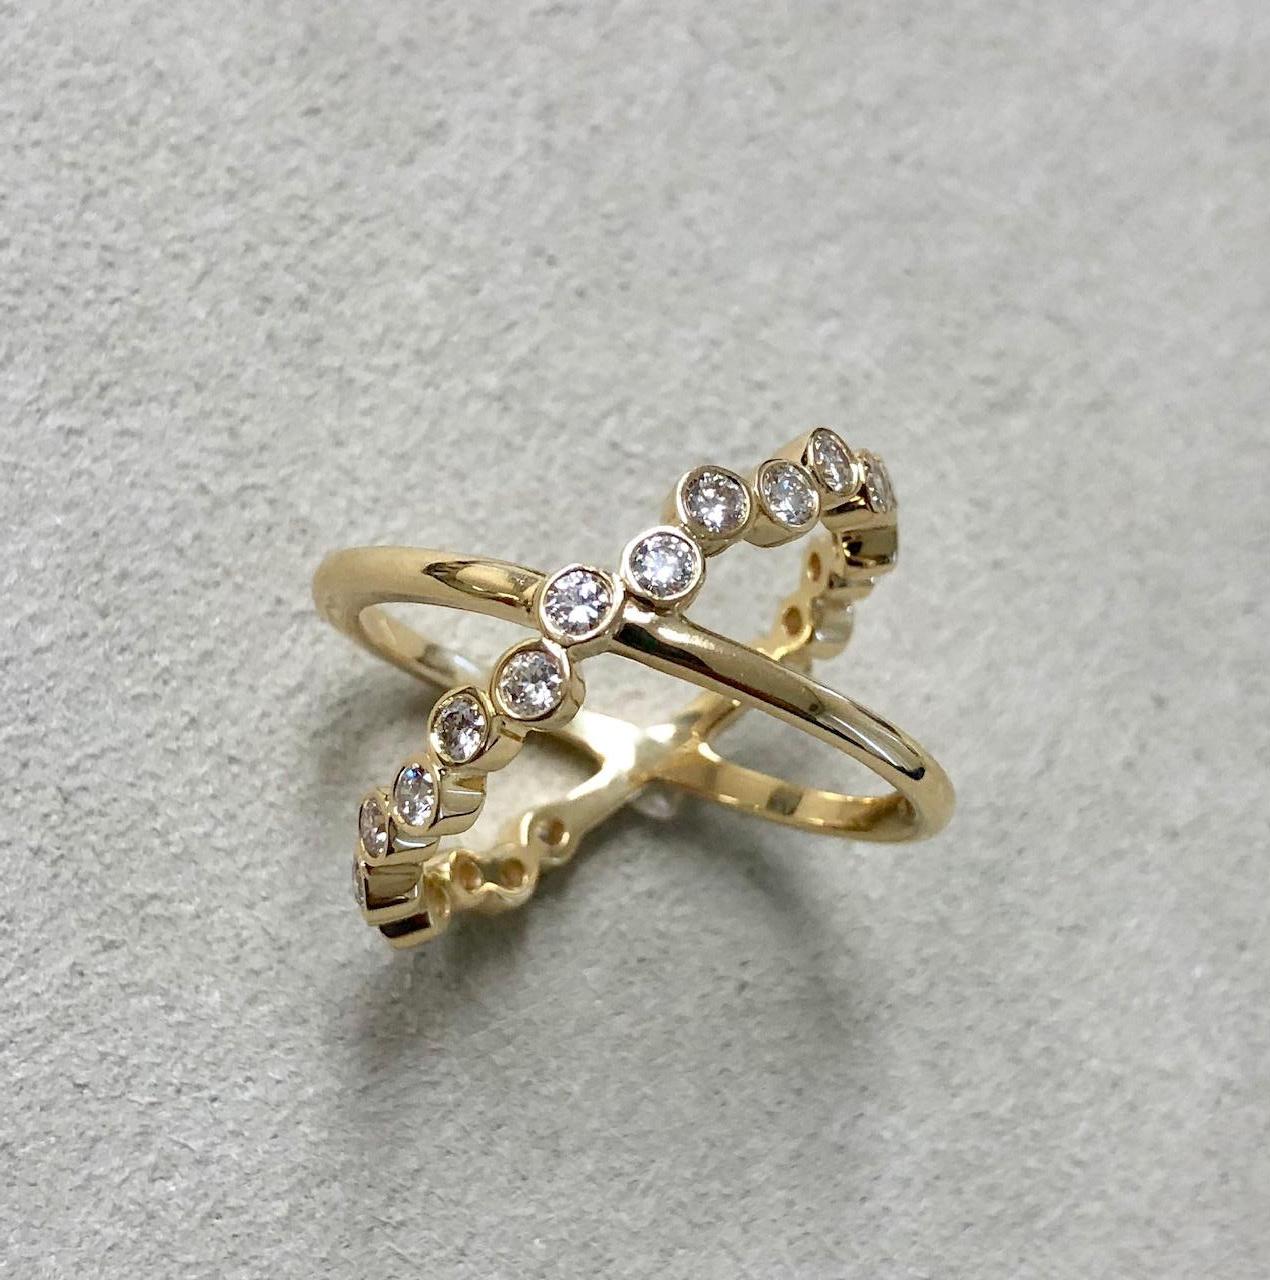 Created in 18 karat yellow gold
Diamonds 0.70 ct approx
Ring size US 7, can be sized as required
Limited edition

This limited edition masterpiece is crafted in luxurious 18 karat yellow gold, and features approximately 0.70ct of twinkling diamonds.